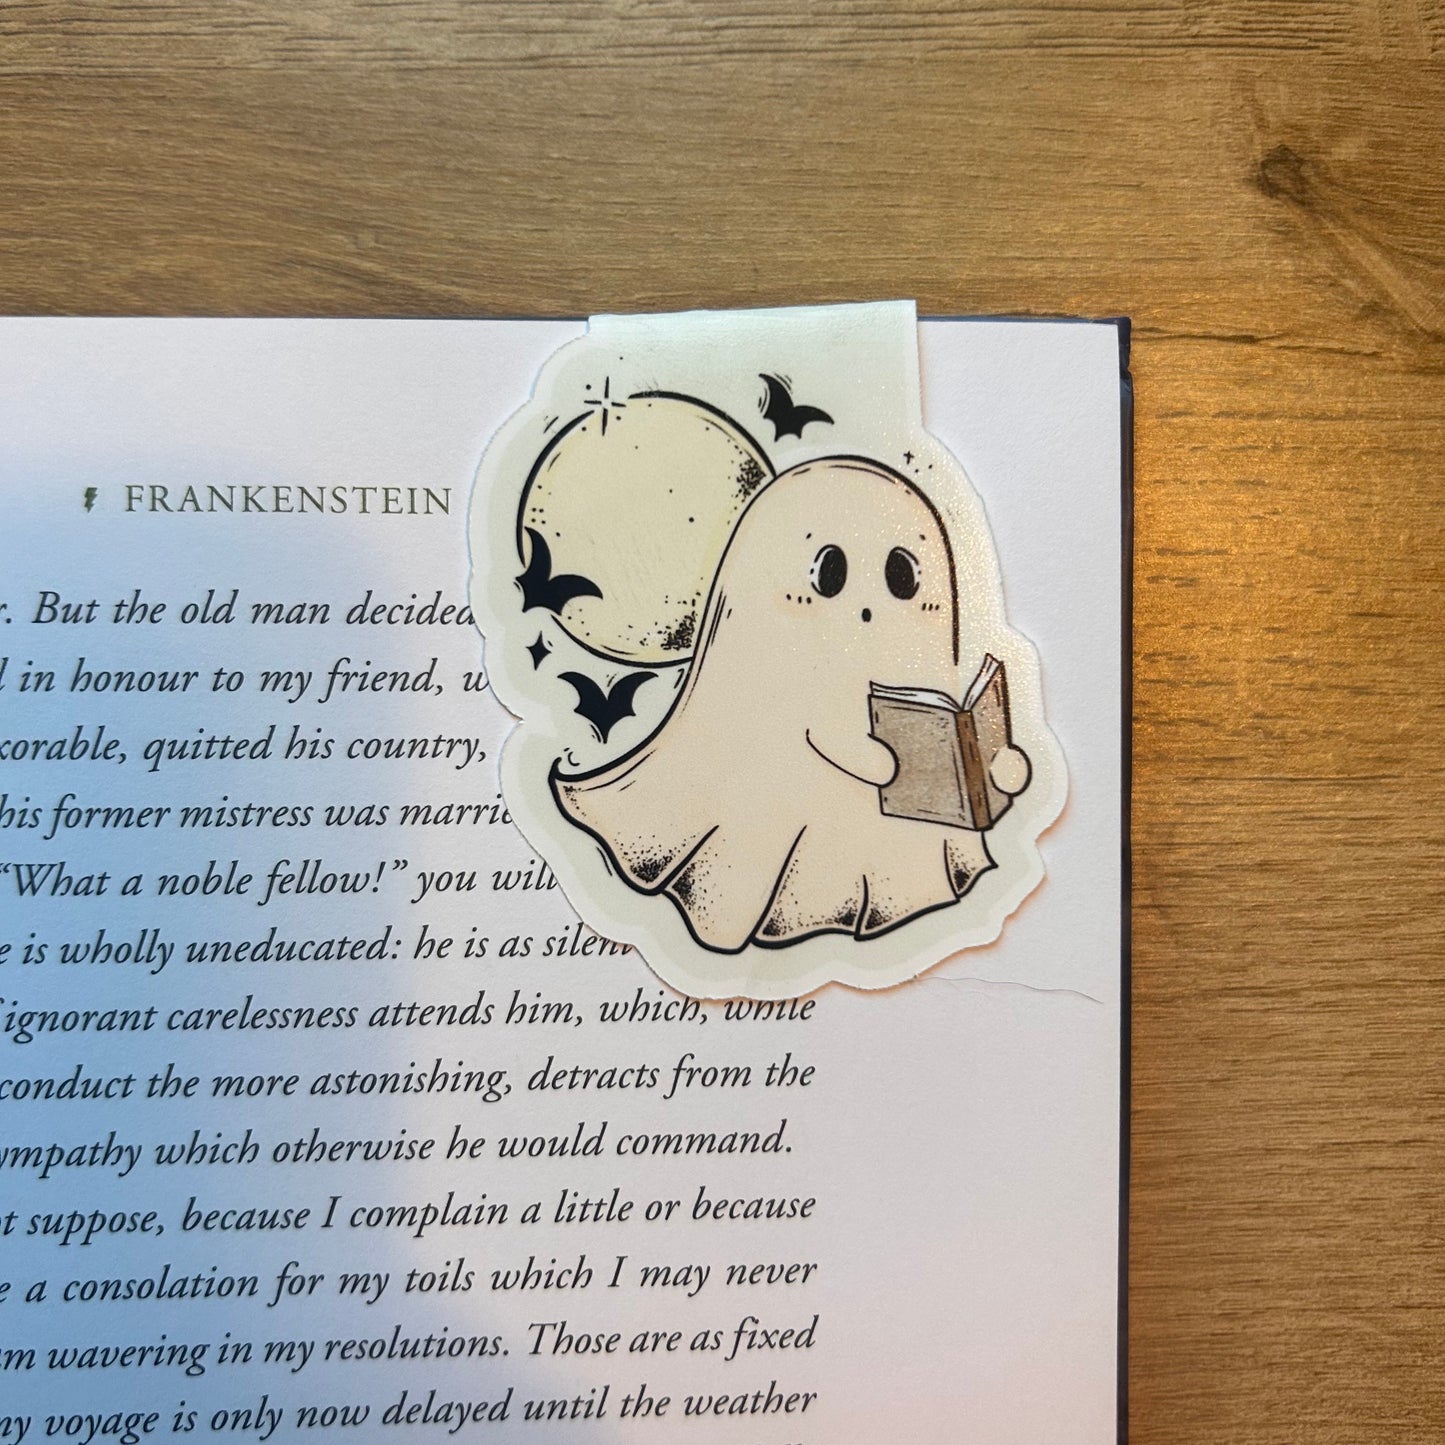 Book Lover Ghost Magnetic Bookmark